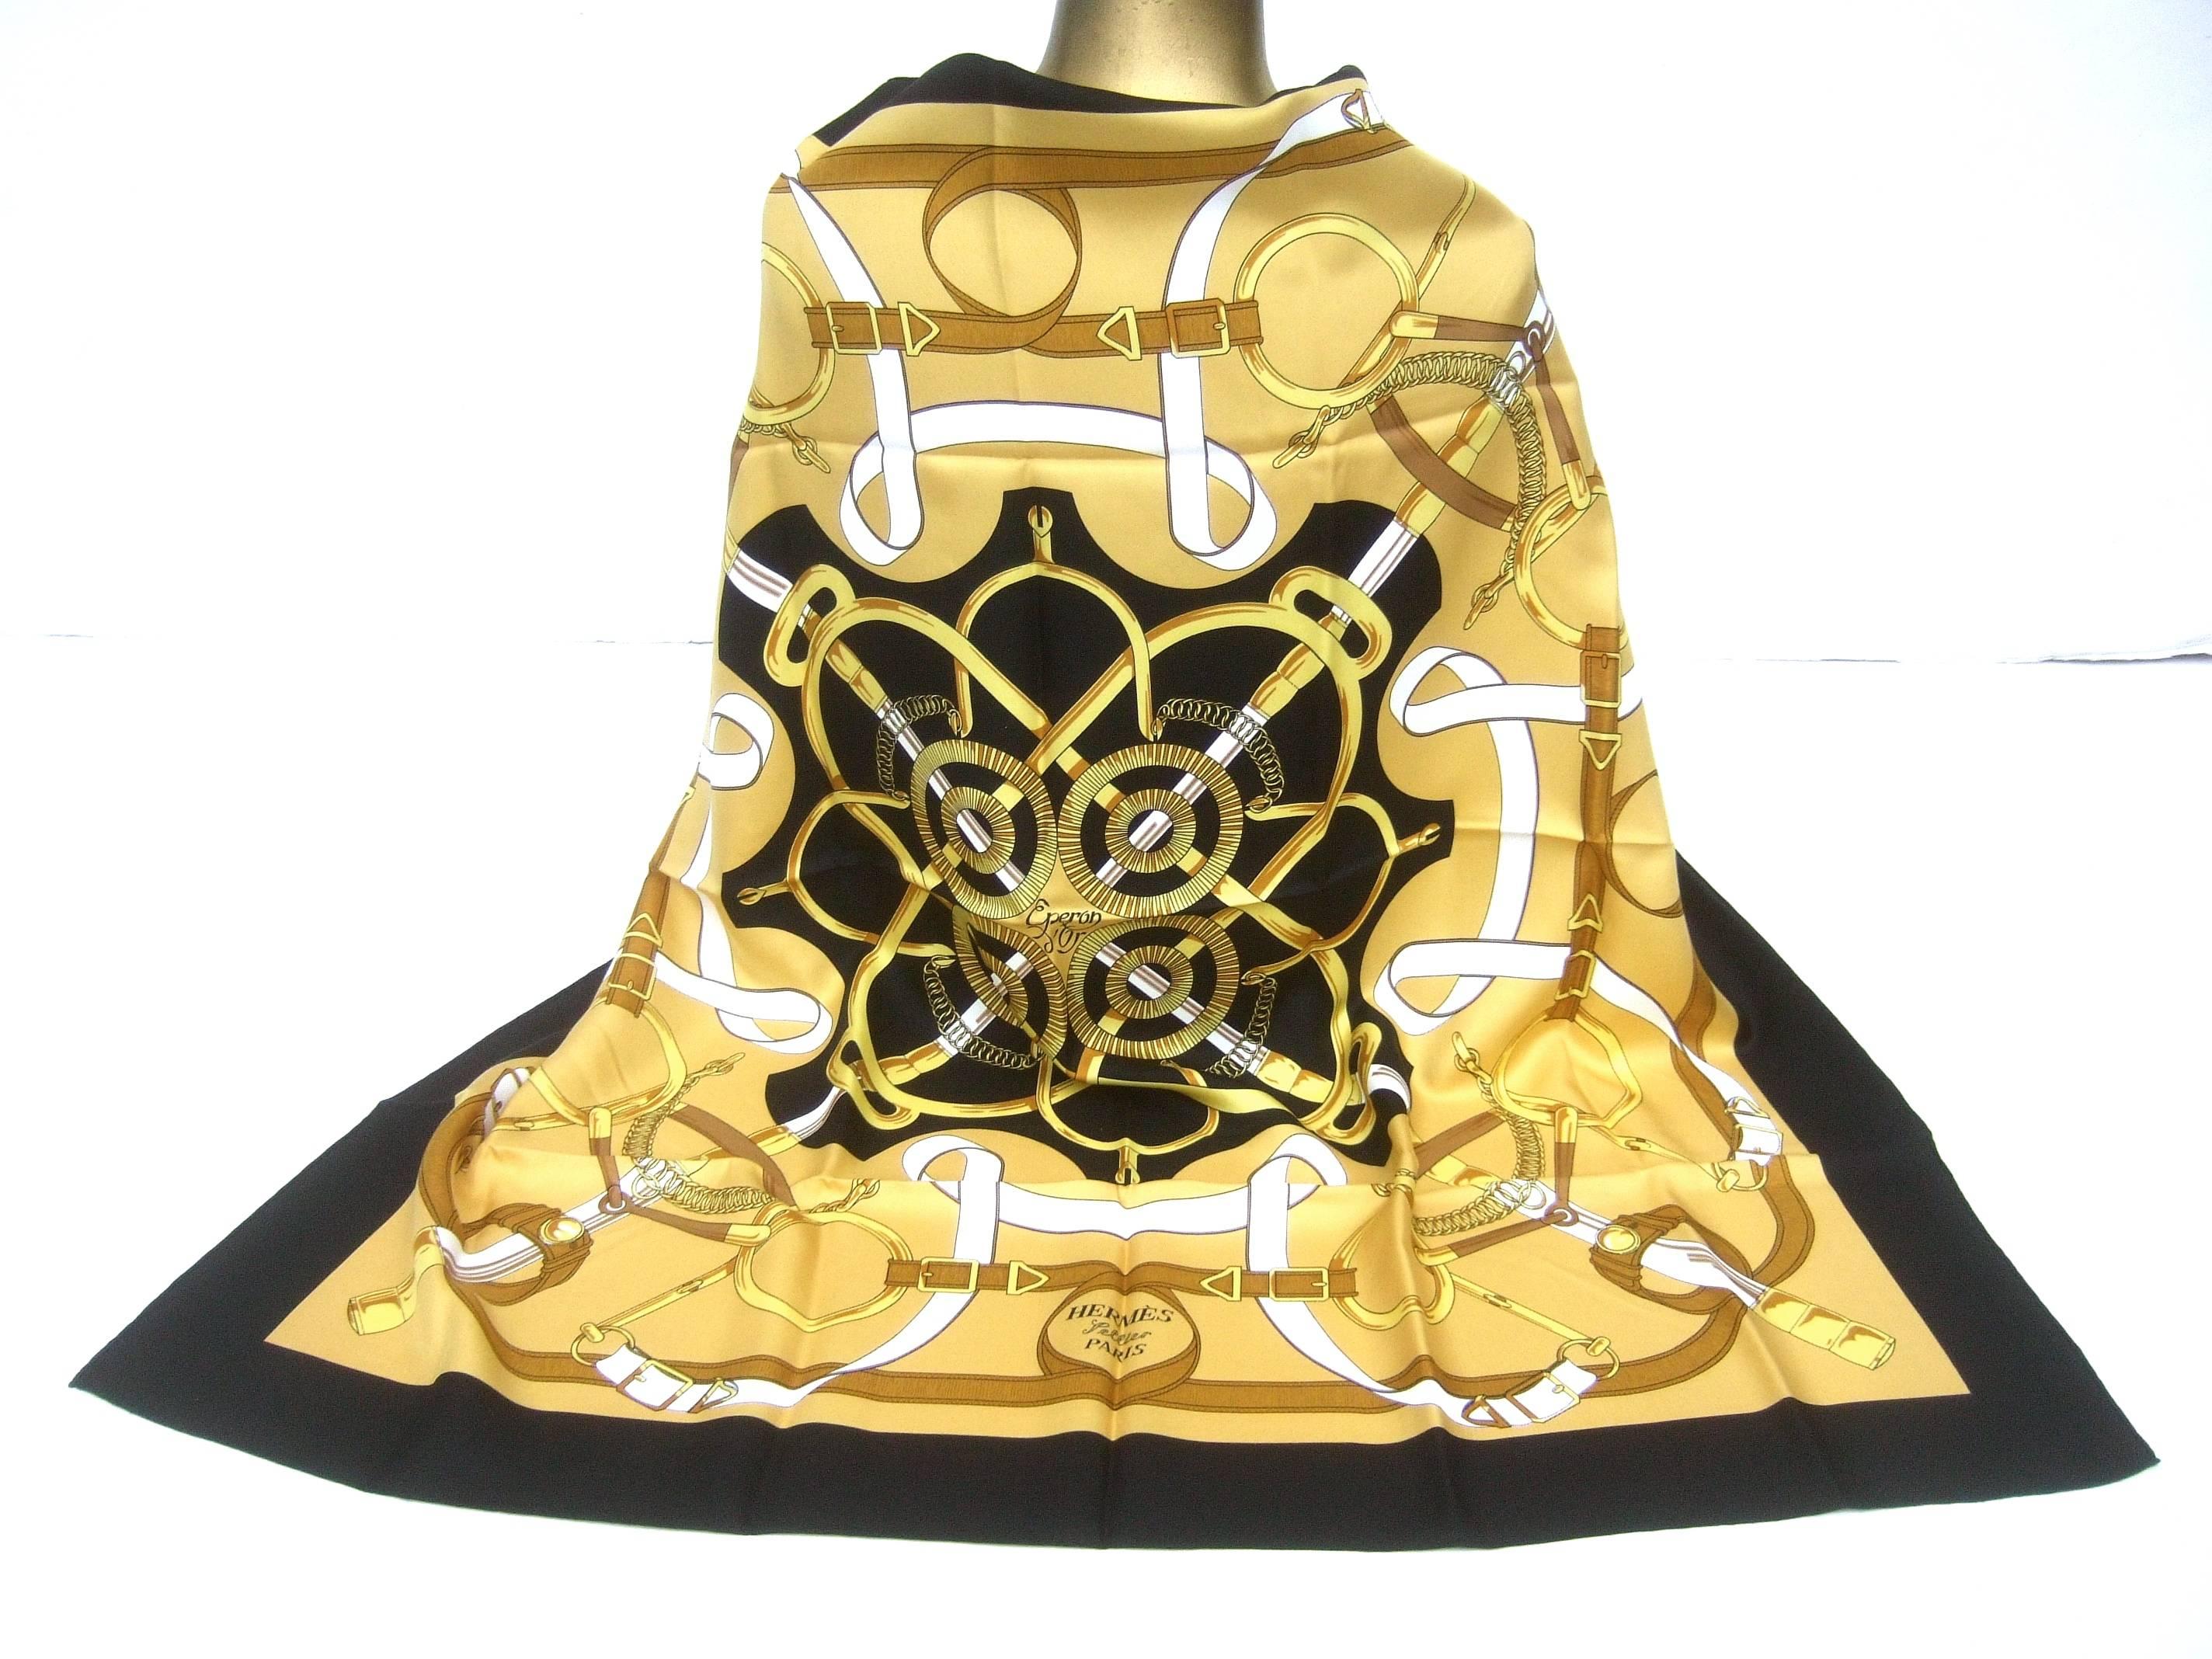 Hermes Paris elegant equestrian bridal theme scarf c 1990s
The luxurious silk hand rolled scarf is illustrated with a collection 
of sinuous golden bridals set against a stark black center 
background with a matching black border 

The sumptuous